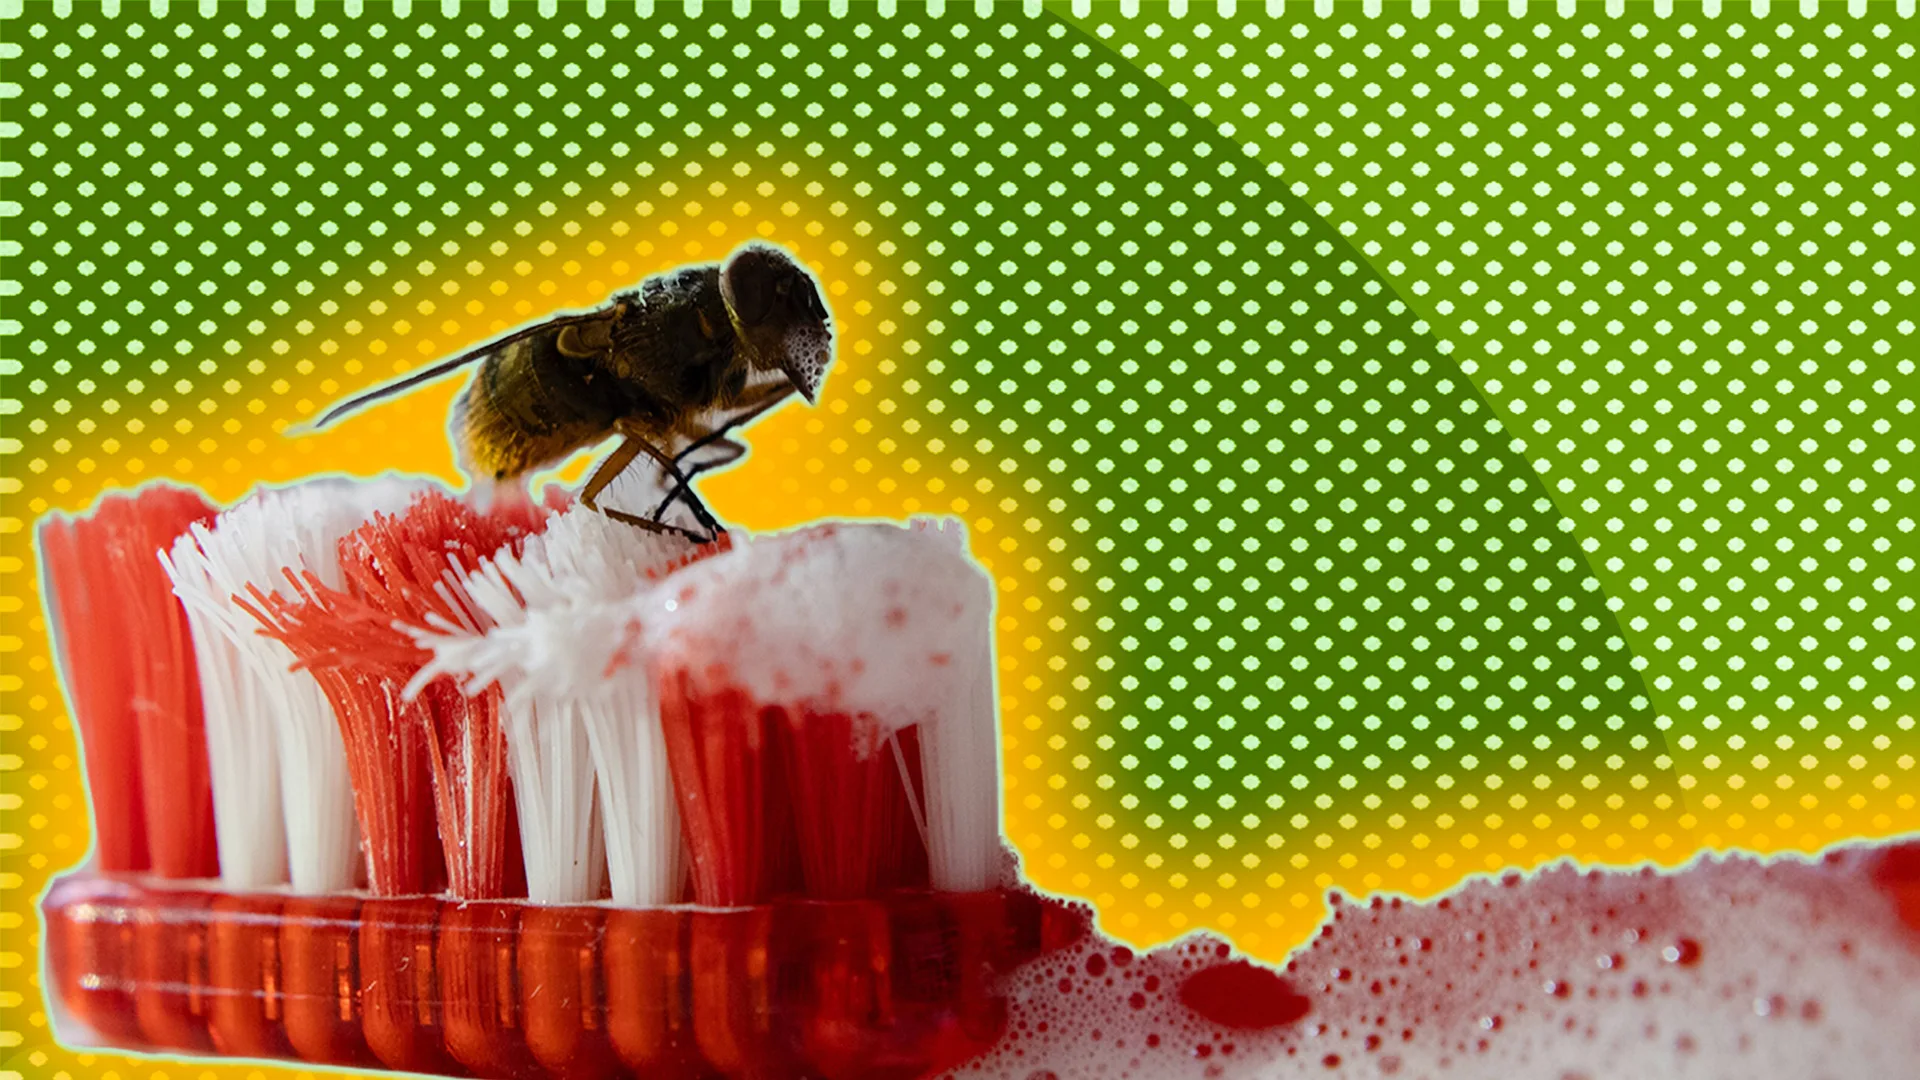 Bee on toothbrush in graphic house style